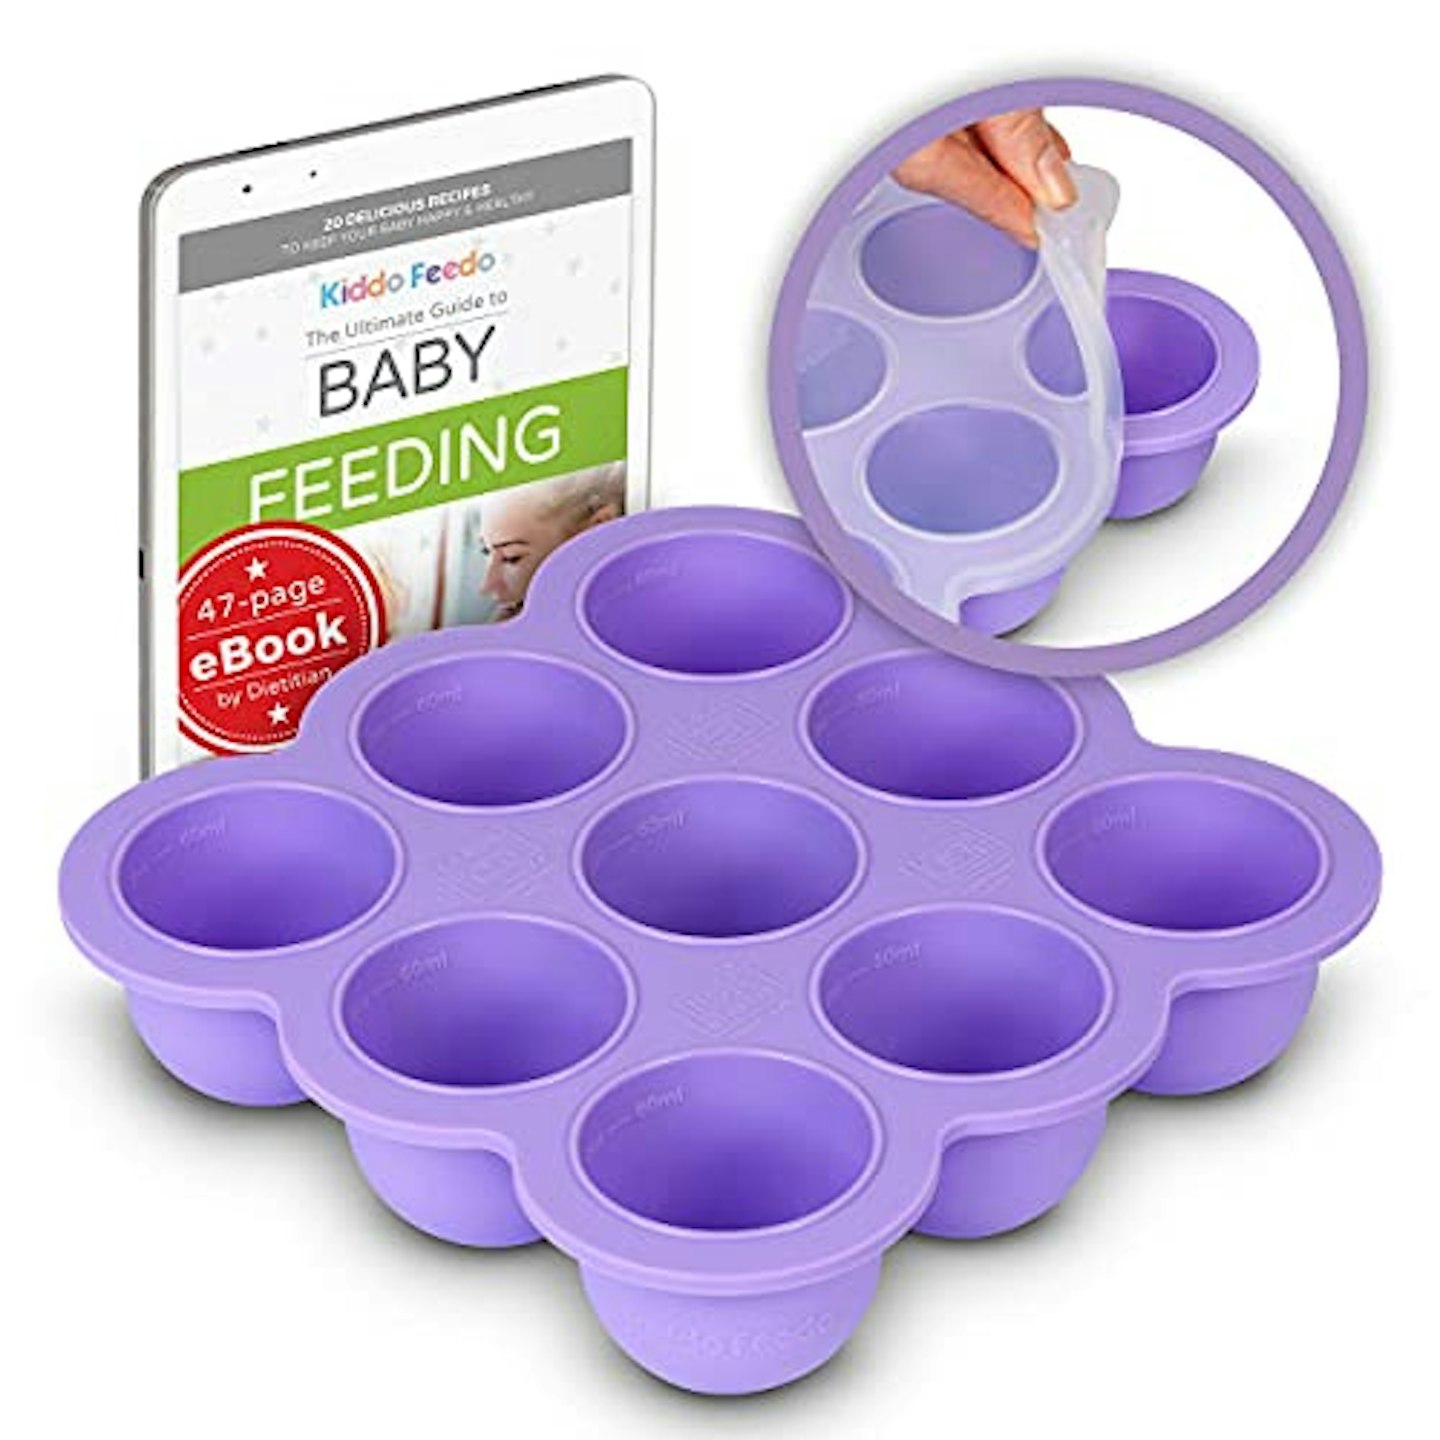 BENGOO Easy to Clean Baby Food Storage & Containers